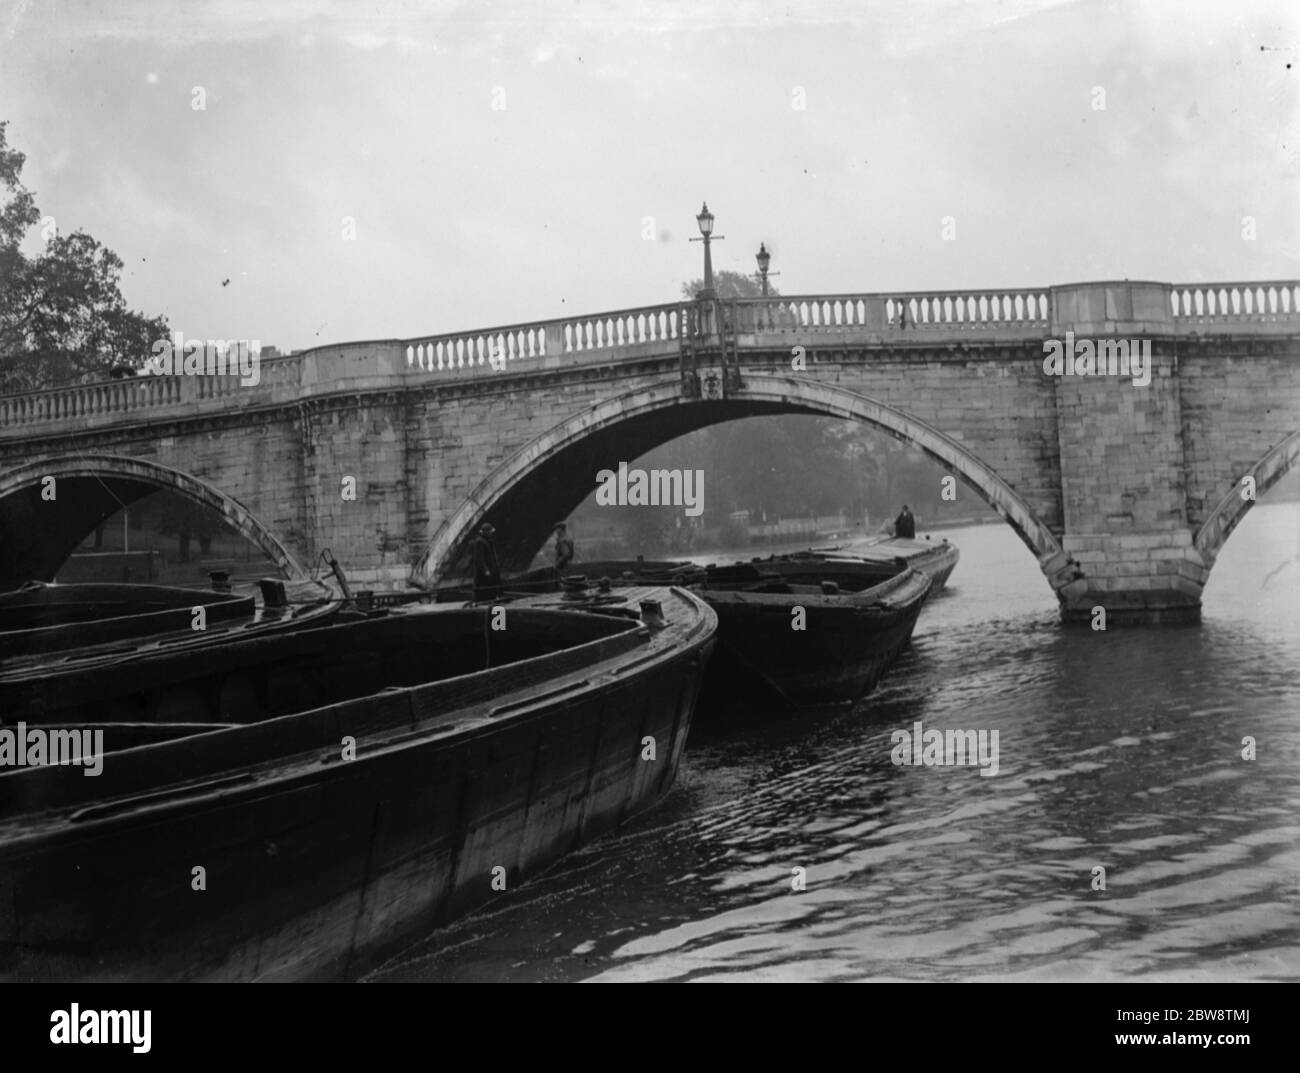 Association of Master Lightermen and Barge Owners have placed an applications for the repair of Richmond Bridge on the river Thames in London . Photos shows barges passing under the Richmond Bridge . 1936 26 October 1936 Stock Photo